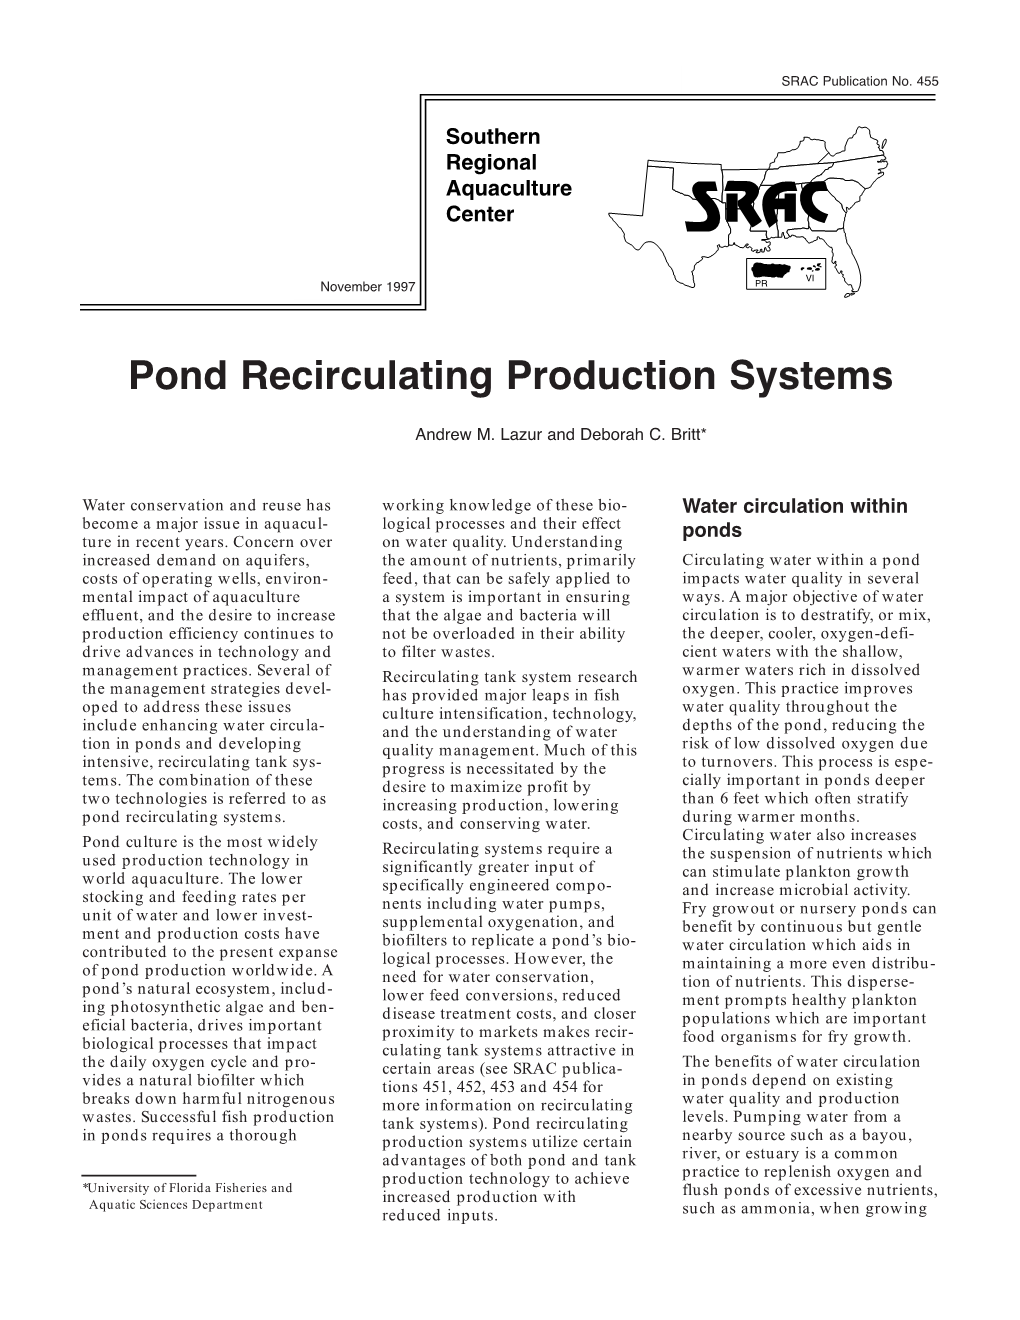 Pond Recirculating Production Systems